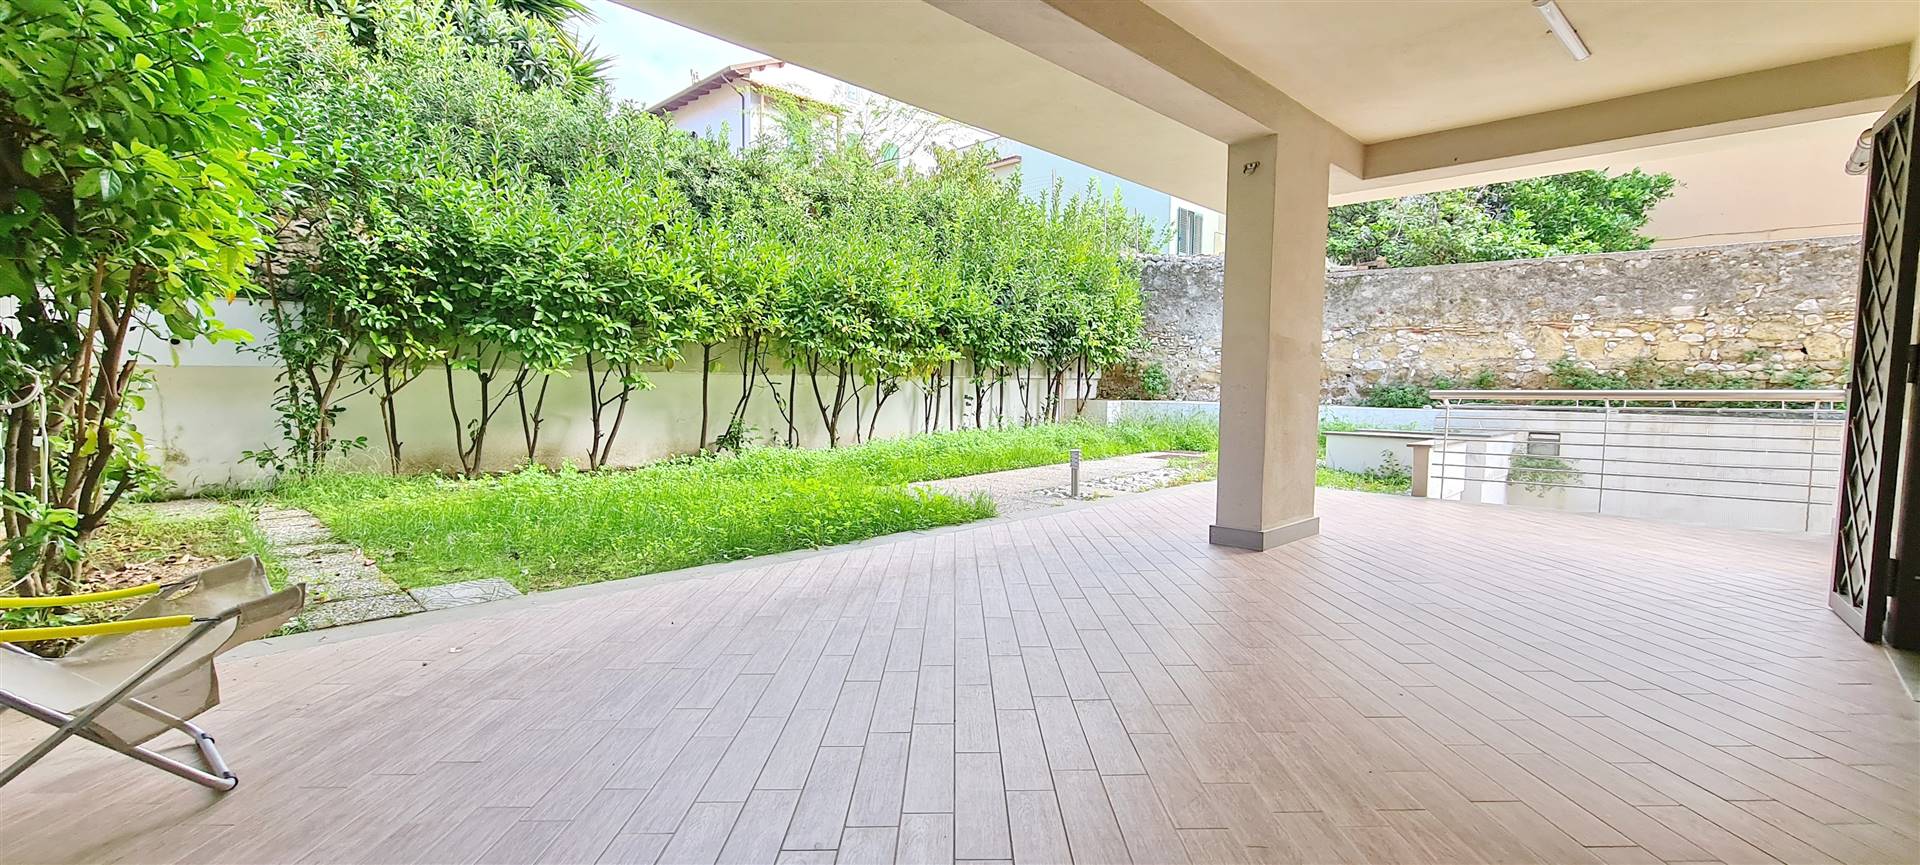 FORMIA, Apartment for sale of 94 Sq. mt., Excellent Condition, Heating Individual heating system, Energetic class: G, placed at Ground, composed by: 